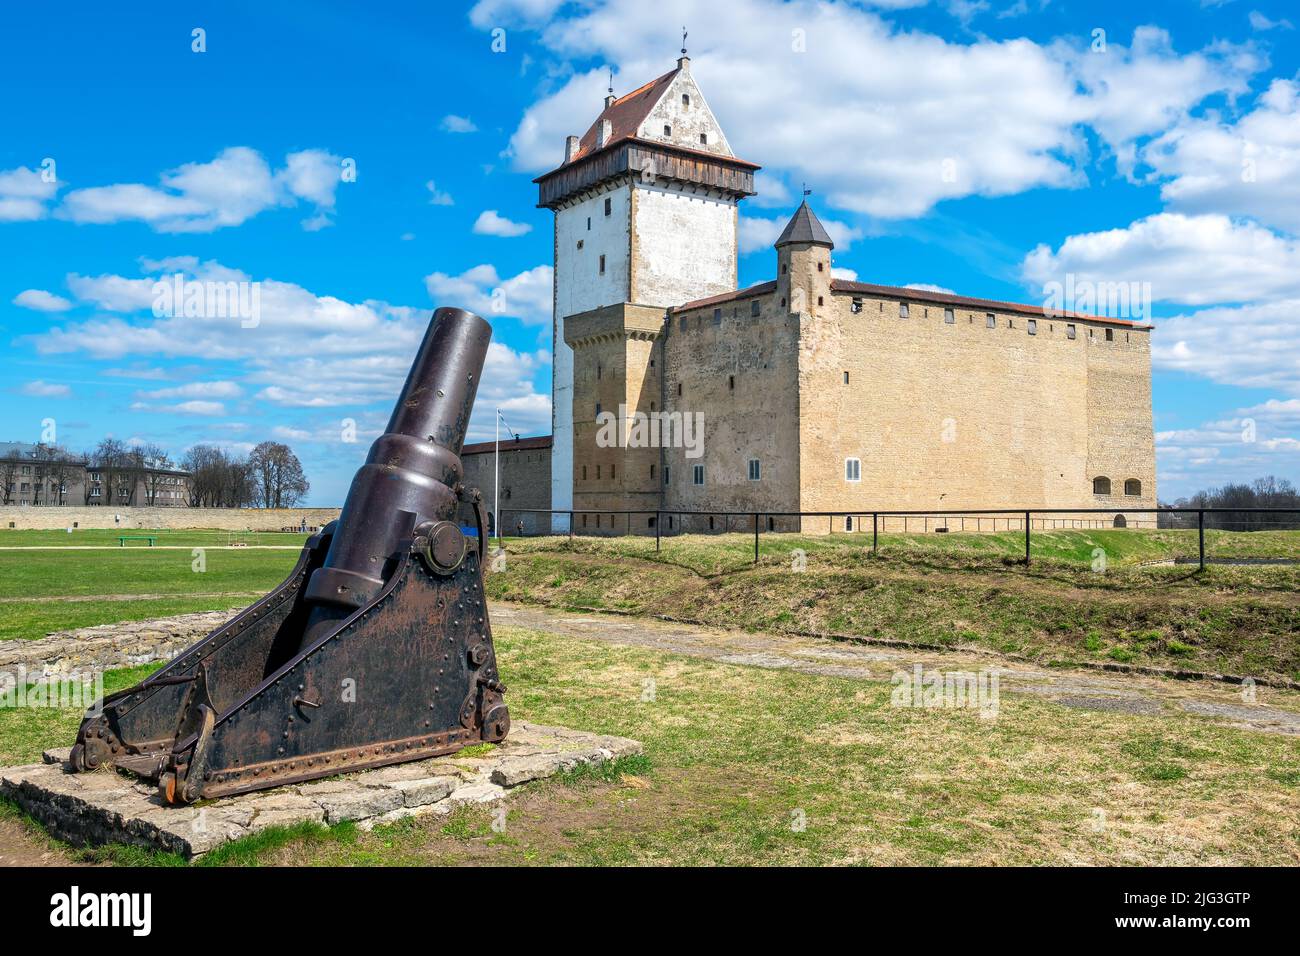 Old mortar and Hermann castle in courtyard at Narva fortress. Narva, Estonia, Baltic States Stock Photo